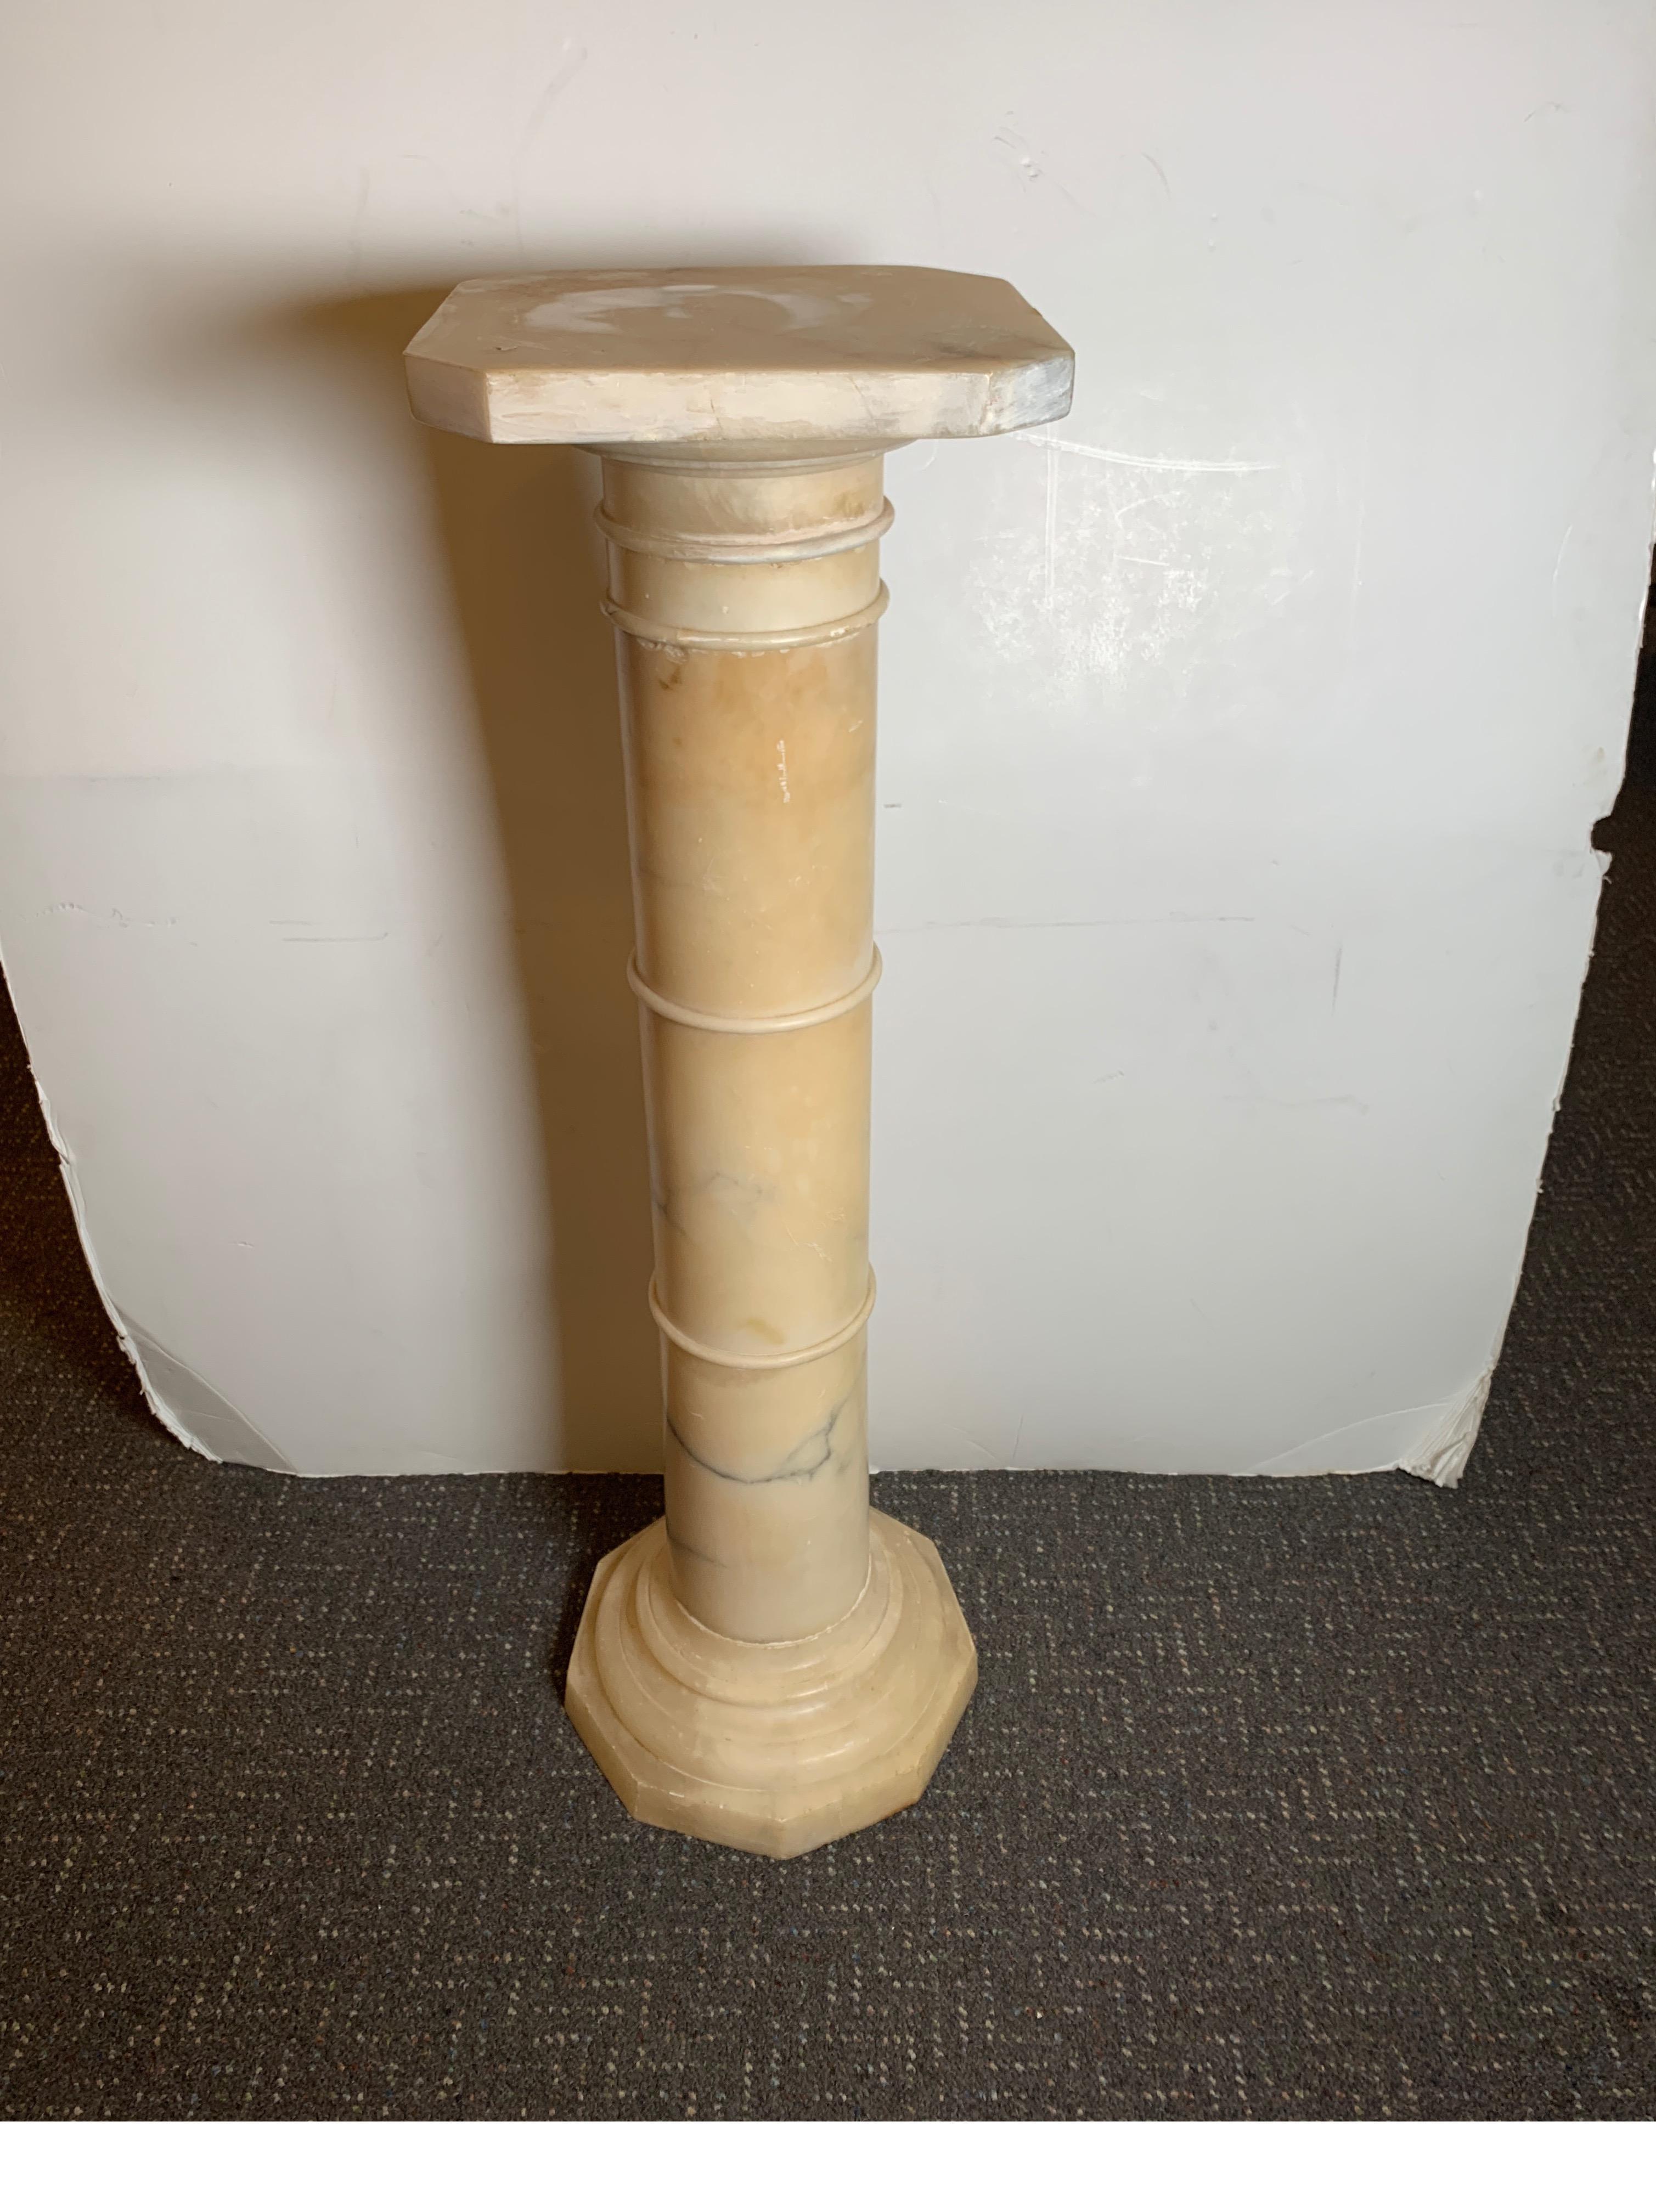 Italian Marble Pedestal, Traditional Minimal Design, circa 1900
Nice size and weight to accommodate heavy objects
Dimensions: 41